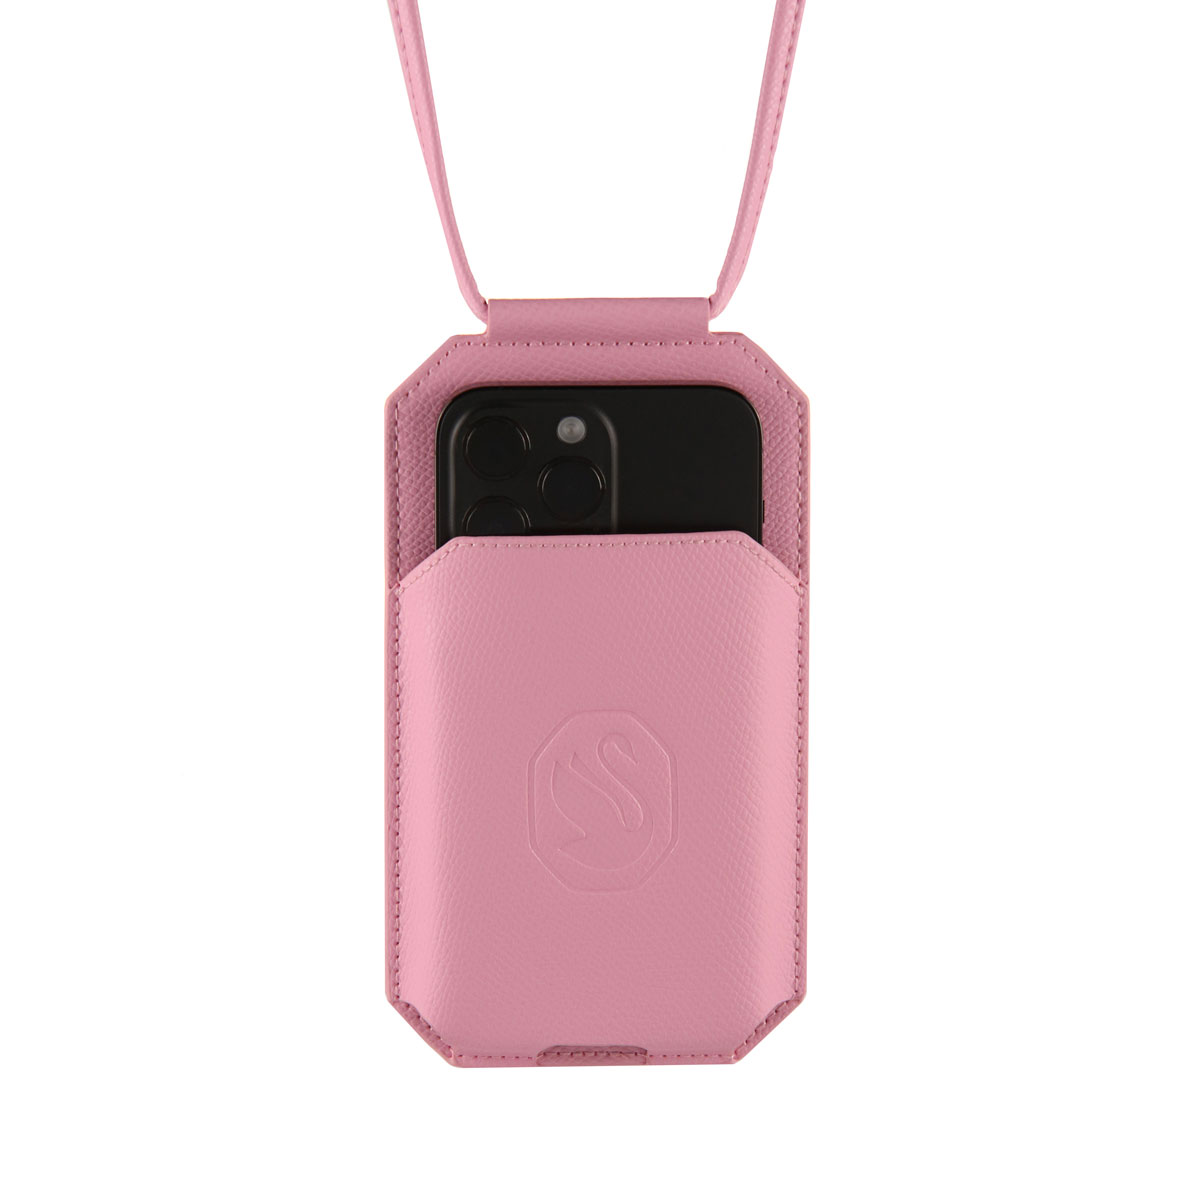 Swarovski Leather iPhone and ID Mobile Holder Lanyard, Pink